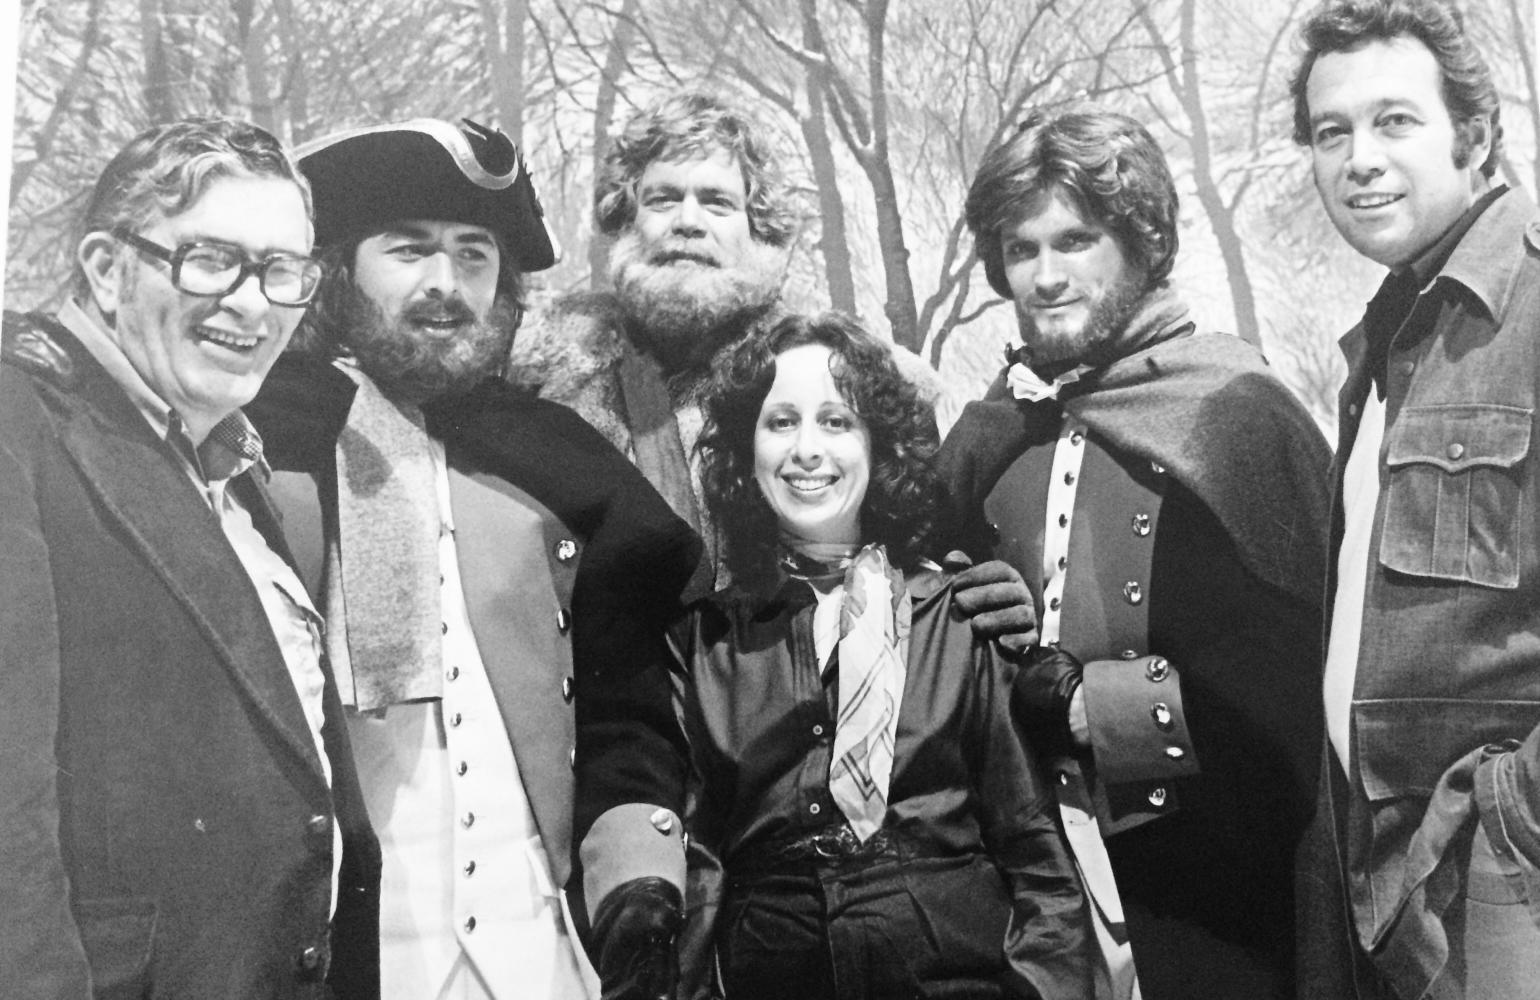 "The Rebels", based on John Jakes' novel. From left: Bob Cinader, Don Johnson (gorgeous even with a beard) as Judson Fletcher, the late Doug McClure (what a nice man!) as Eph Tait, Andrew Stevens as Philip Kent (character originated in "The Bastard"), and Gino Grimaldi, co-producer. I'm in the front, of course, always the shortest. I love being surrounded by these guys.